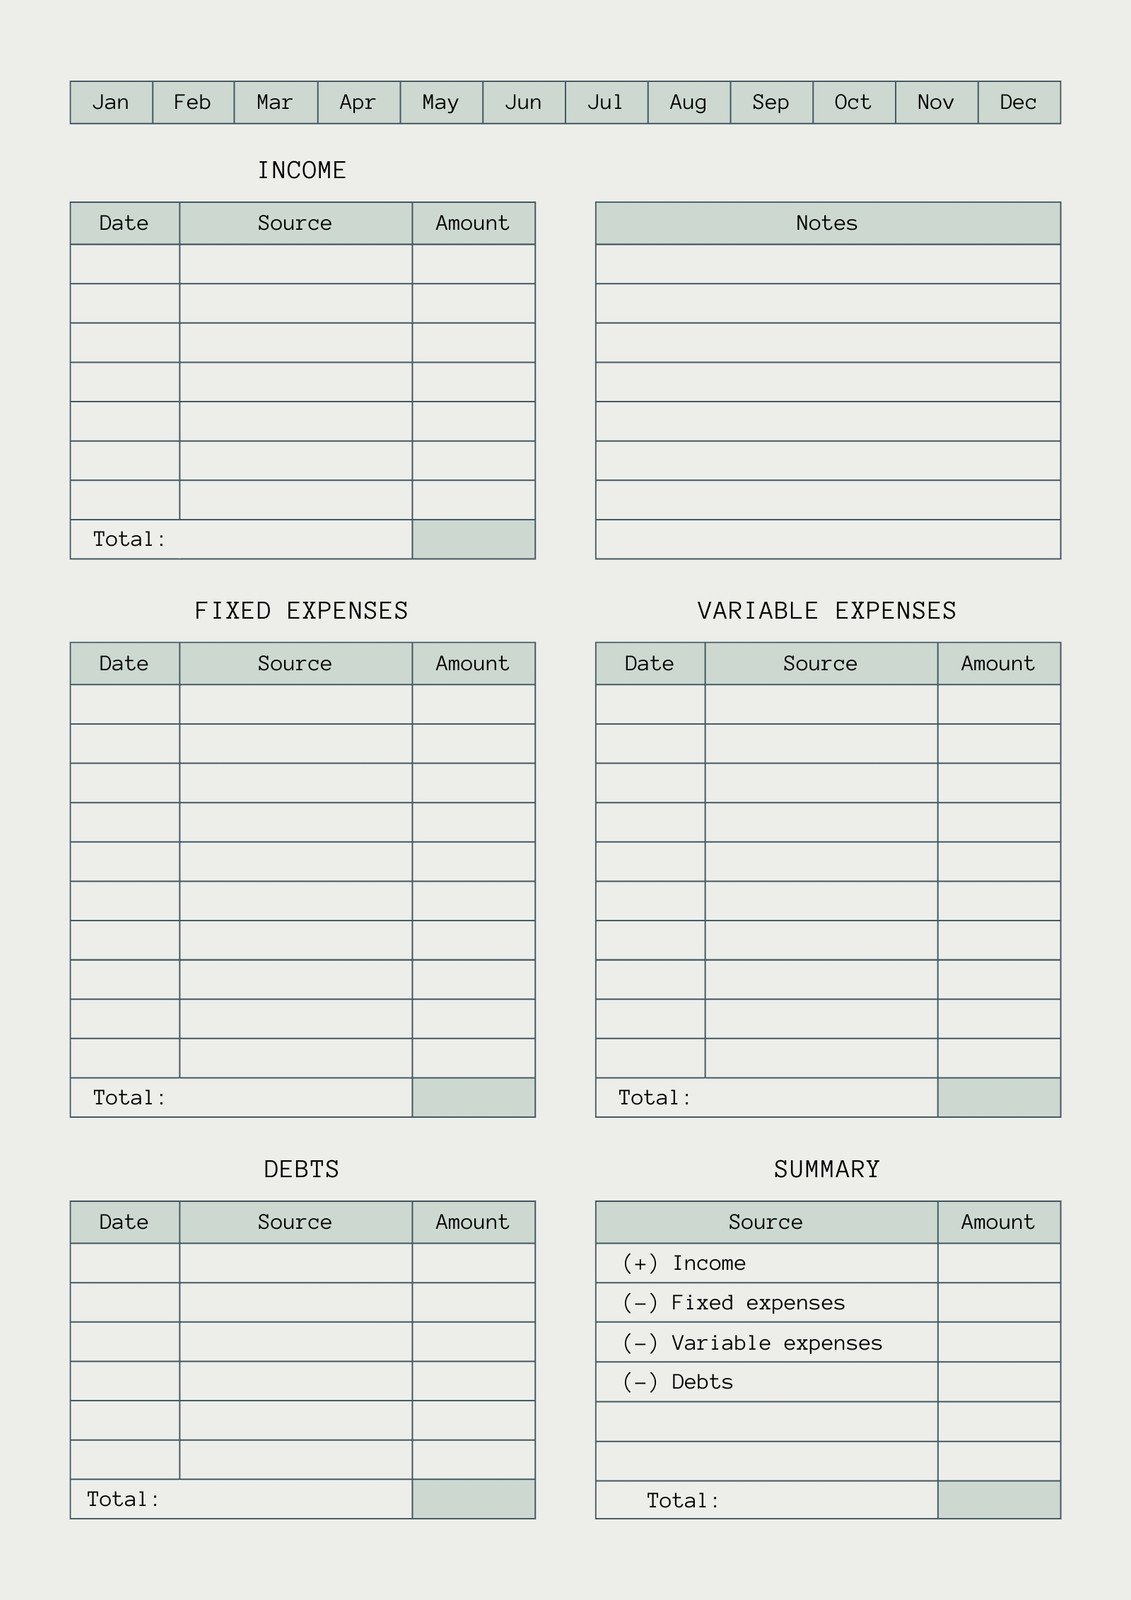 free financial business budget planning template